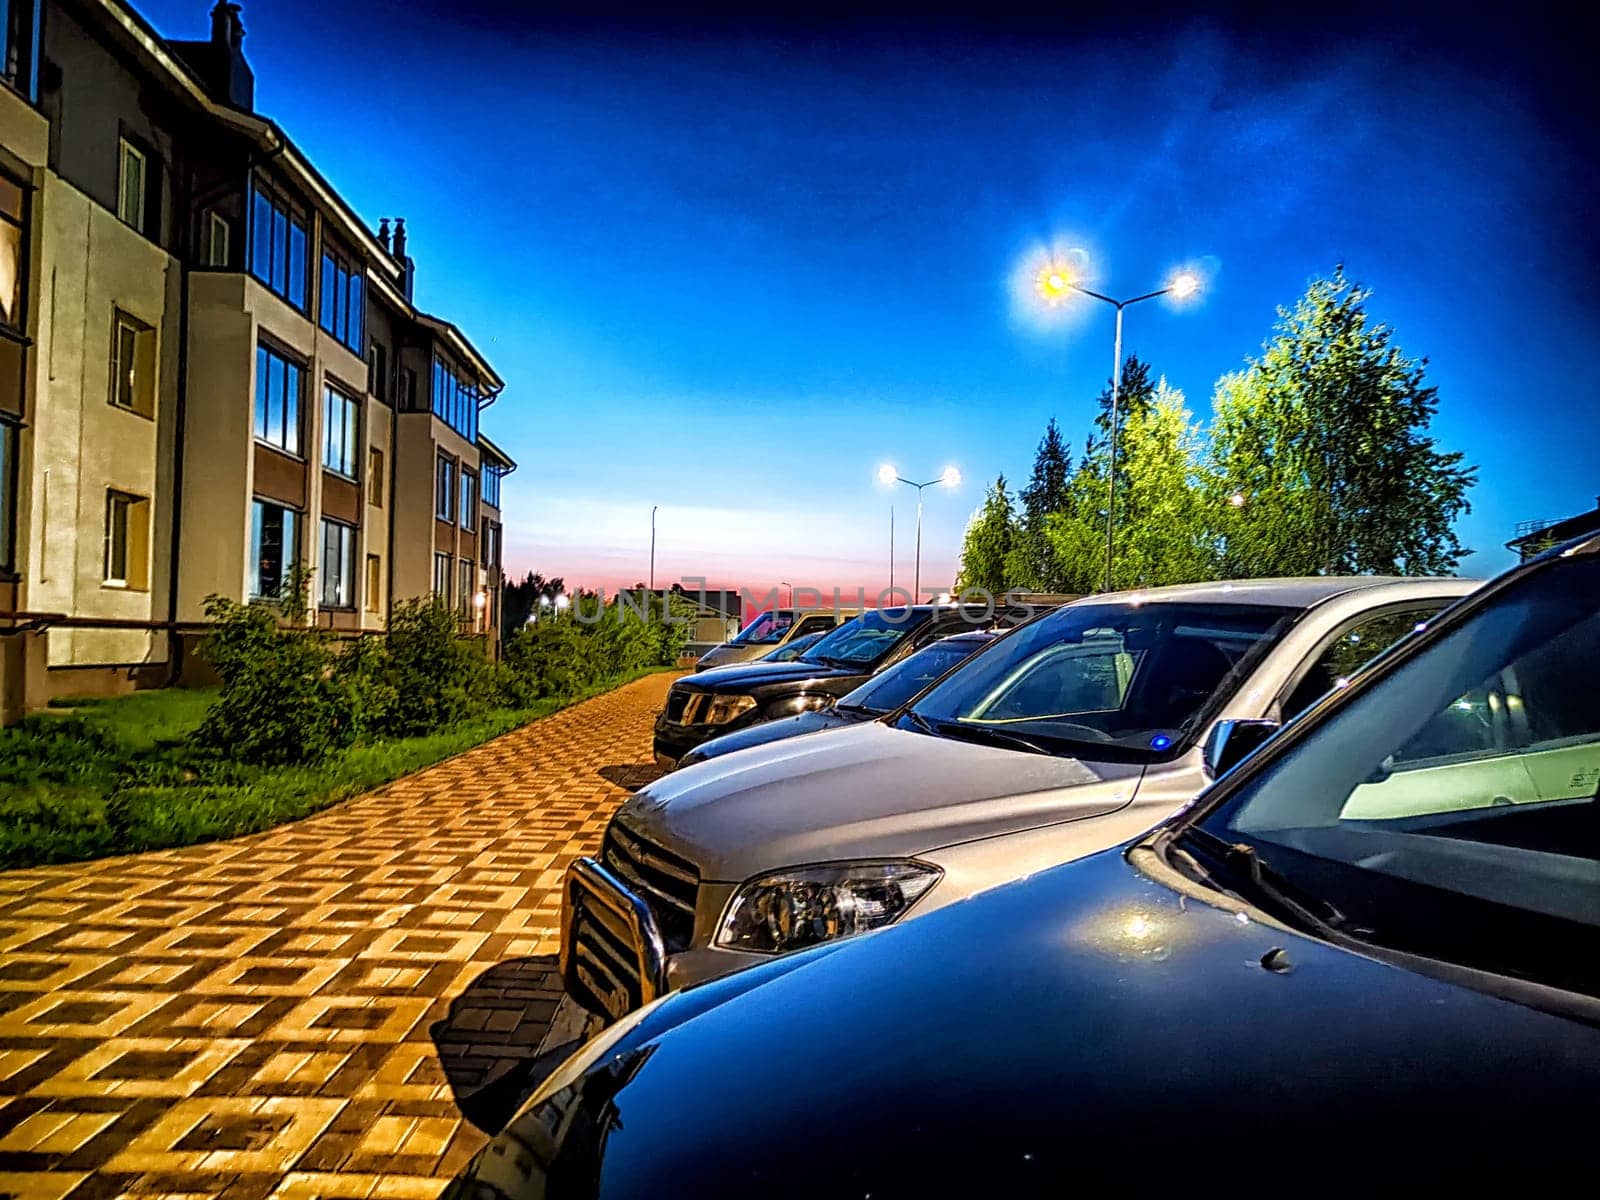 Night, village, houses and cars in the parking lot. Photography is like a painting. Serene Village Nightfall With Parked Cars and Illuminated Homes by keleny